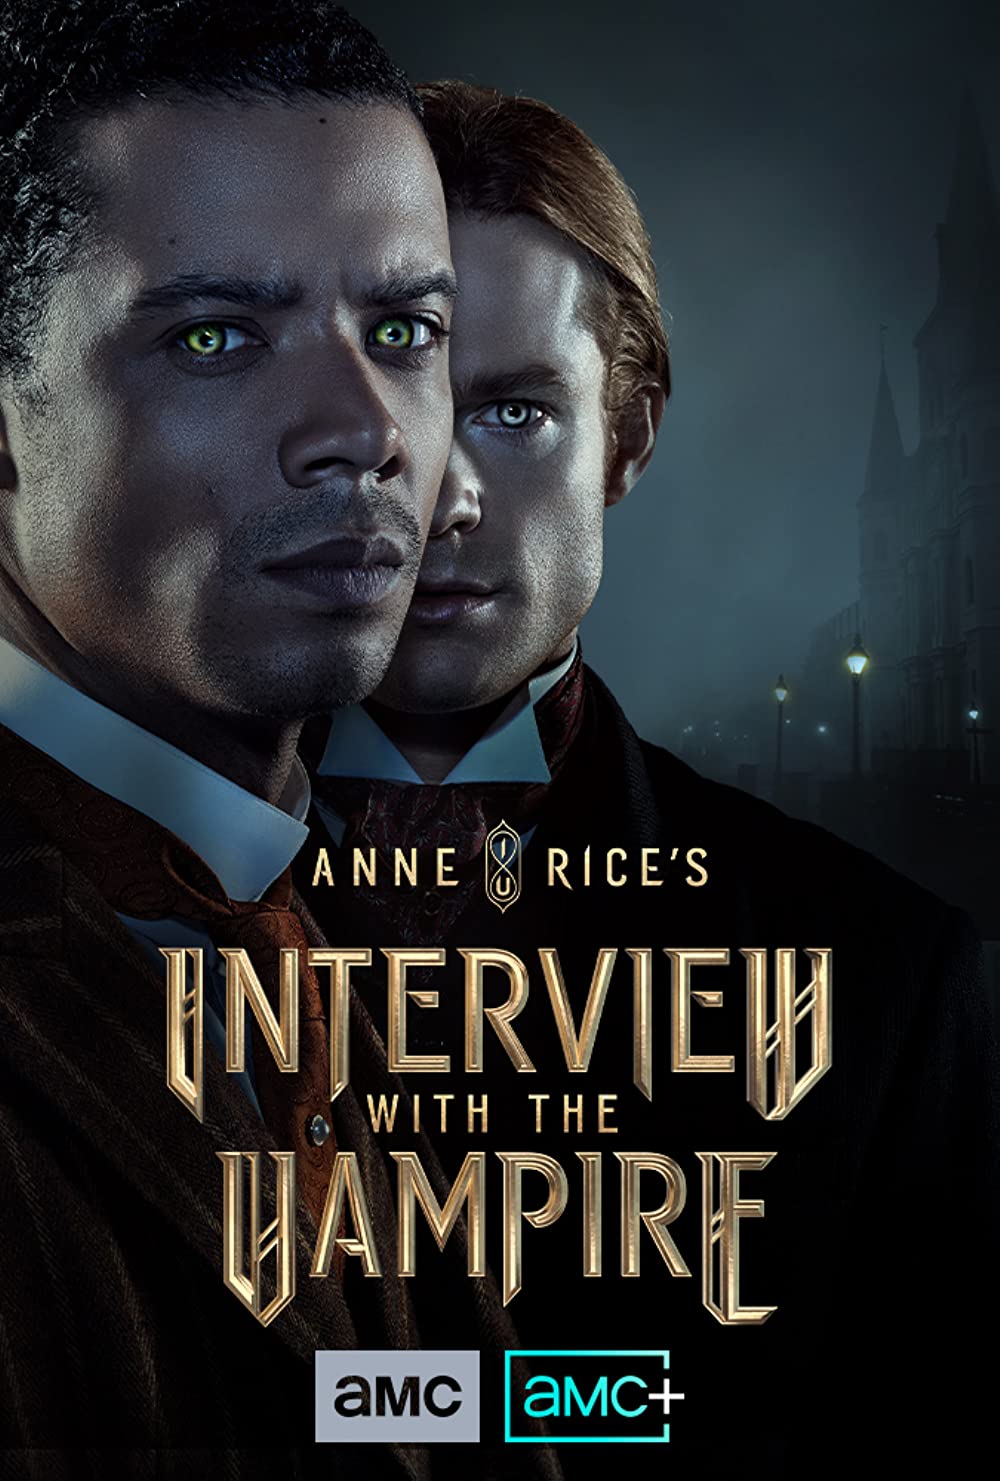 Interview with the Vampire (2022)